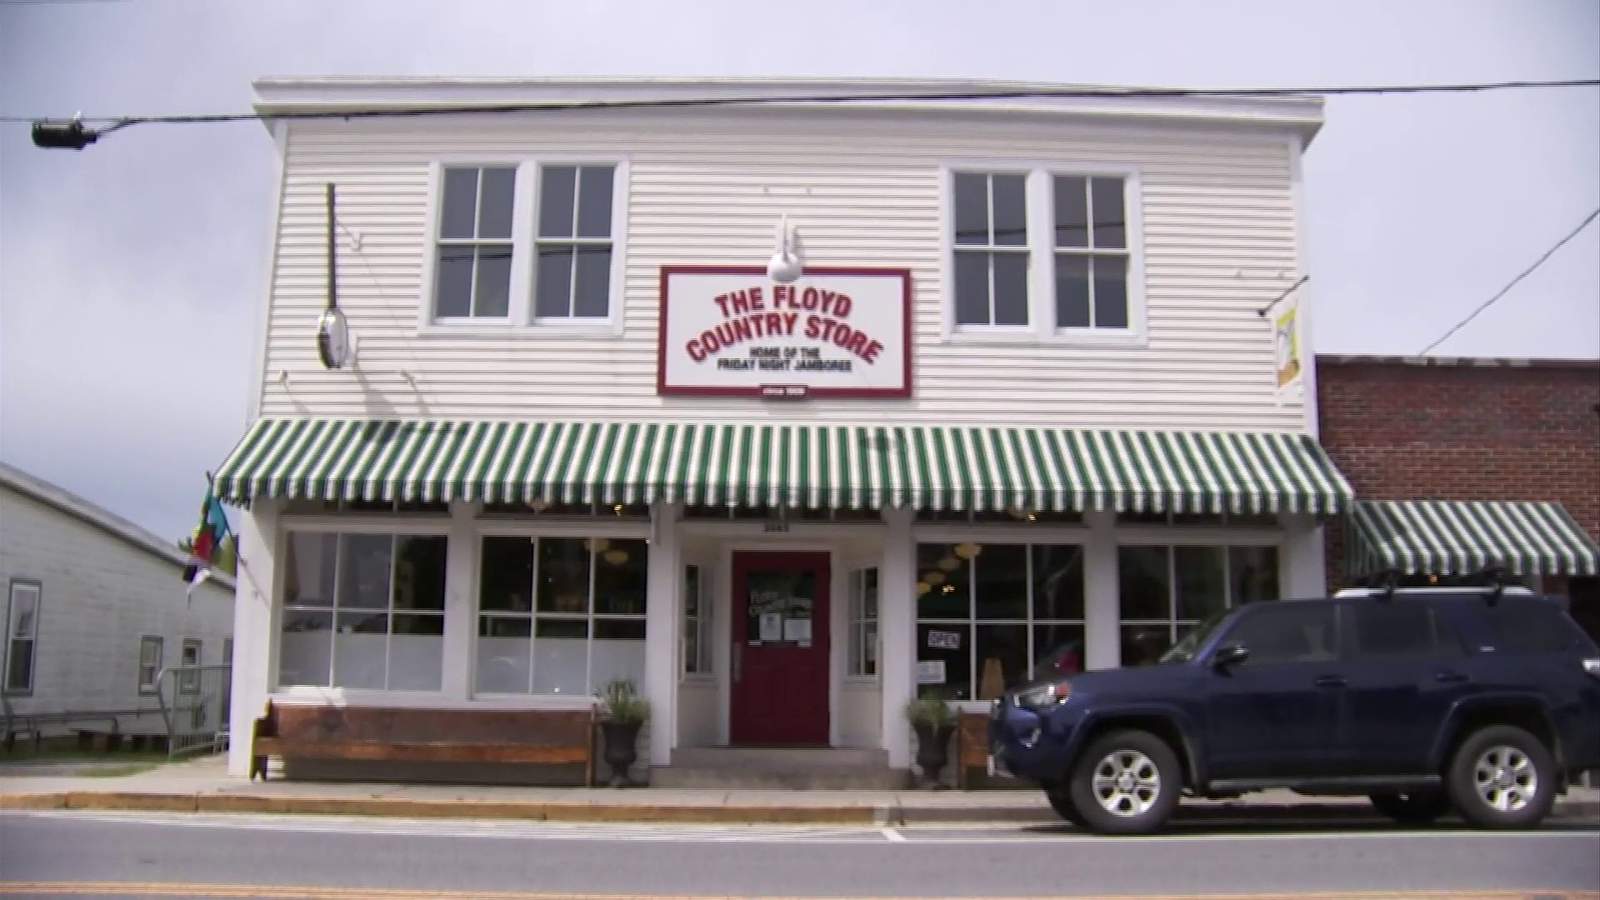 The stores having a hard time: Group hopes to raise $60,000 for Floyd Country Store